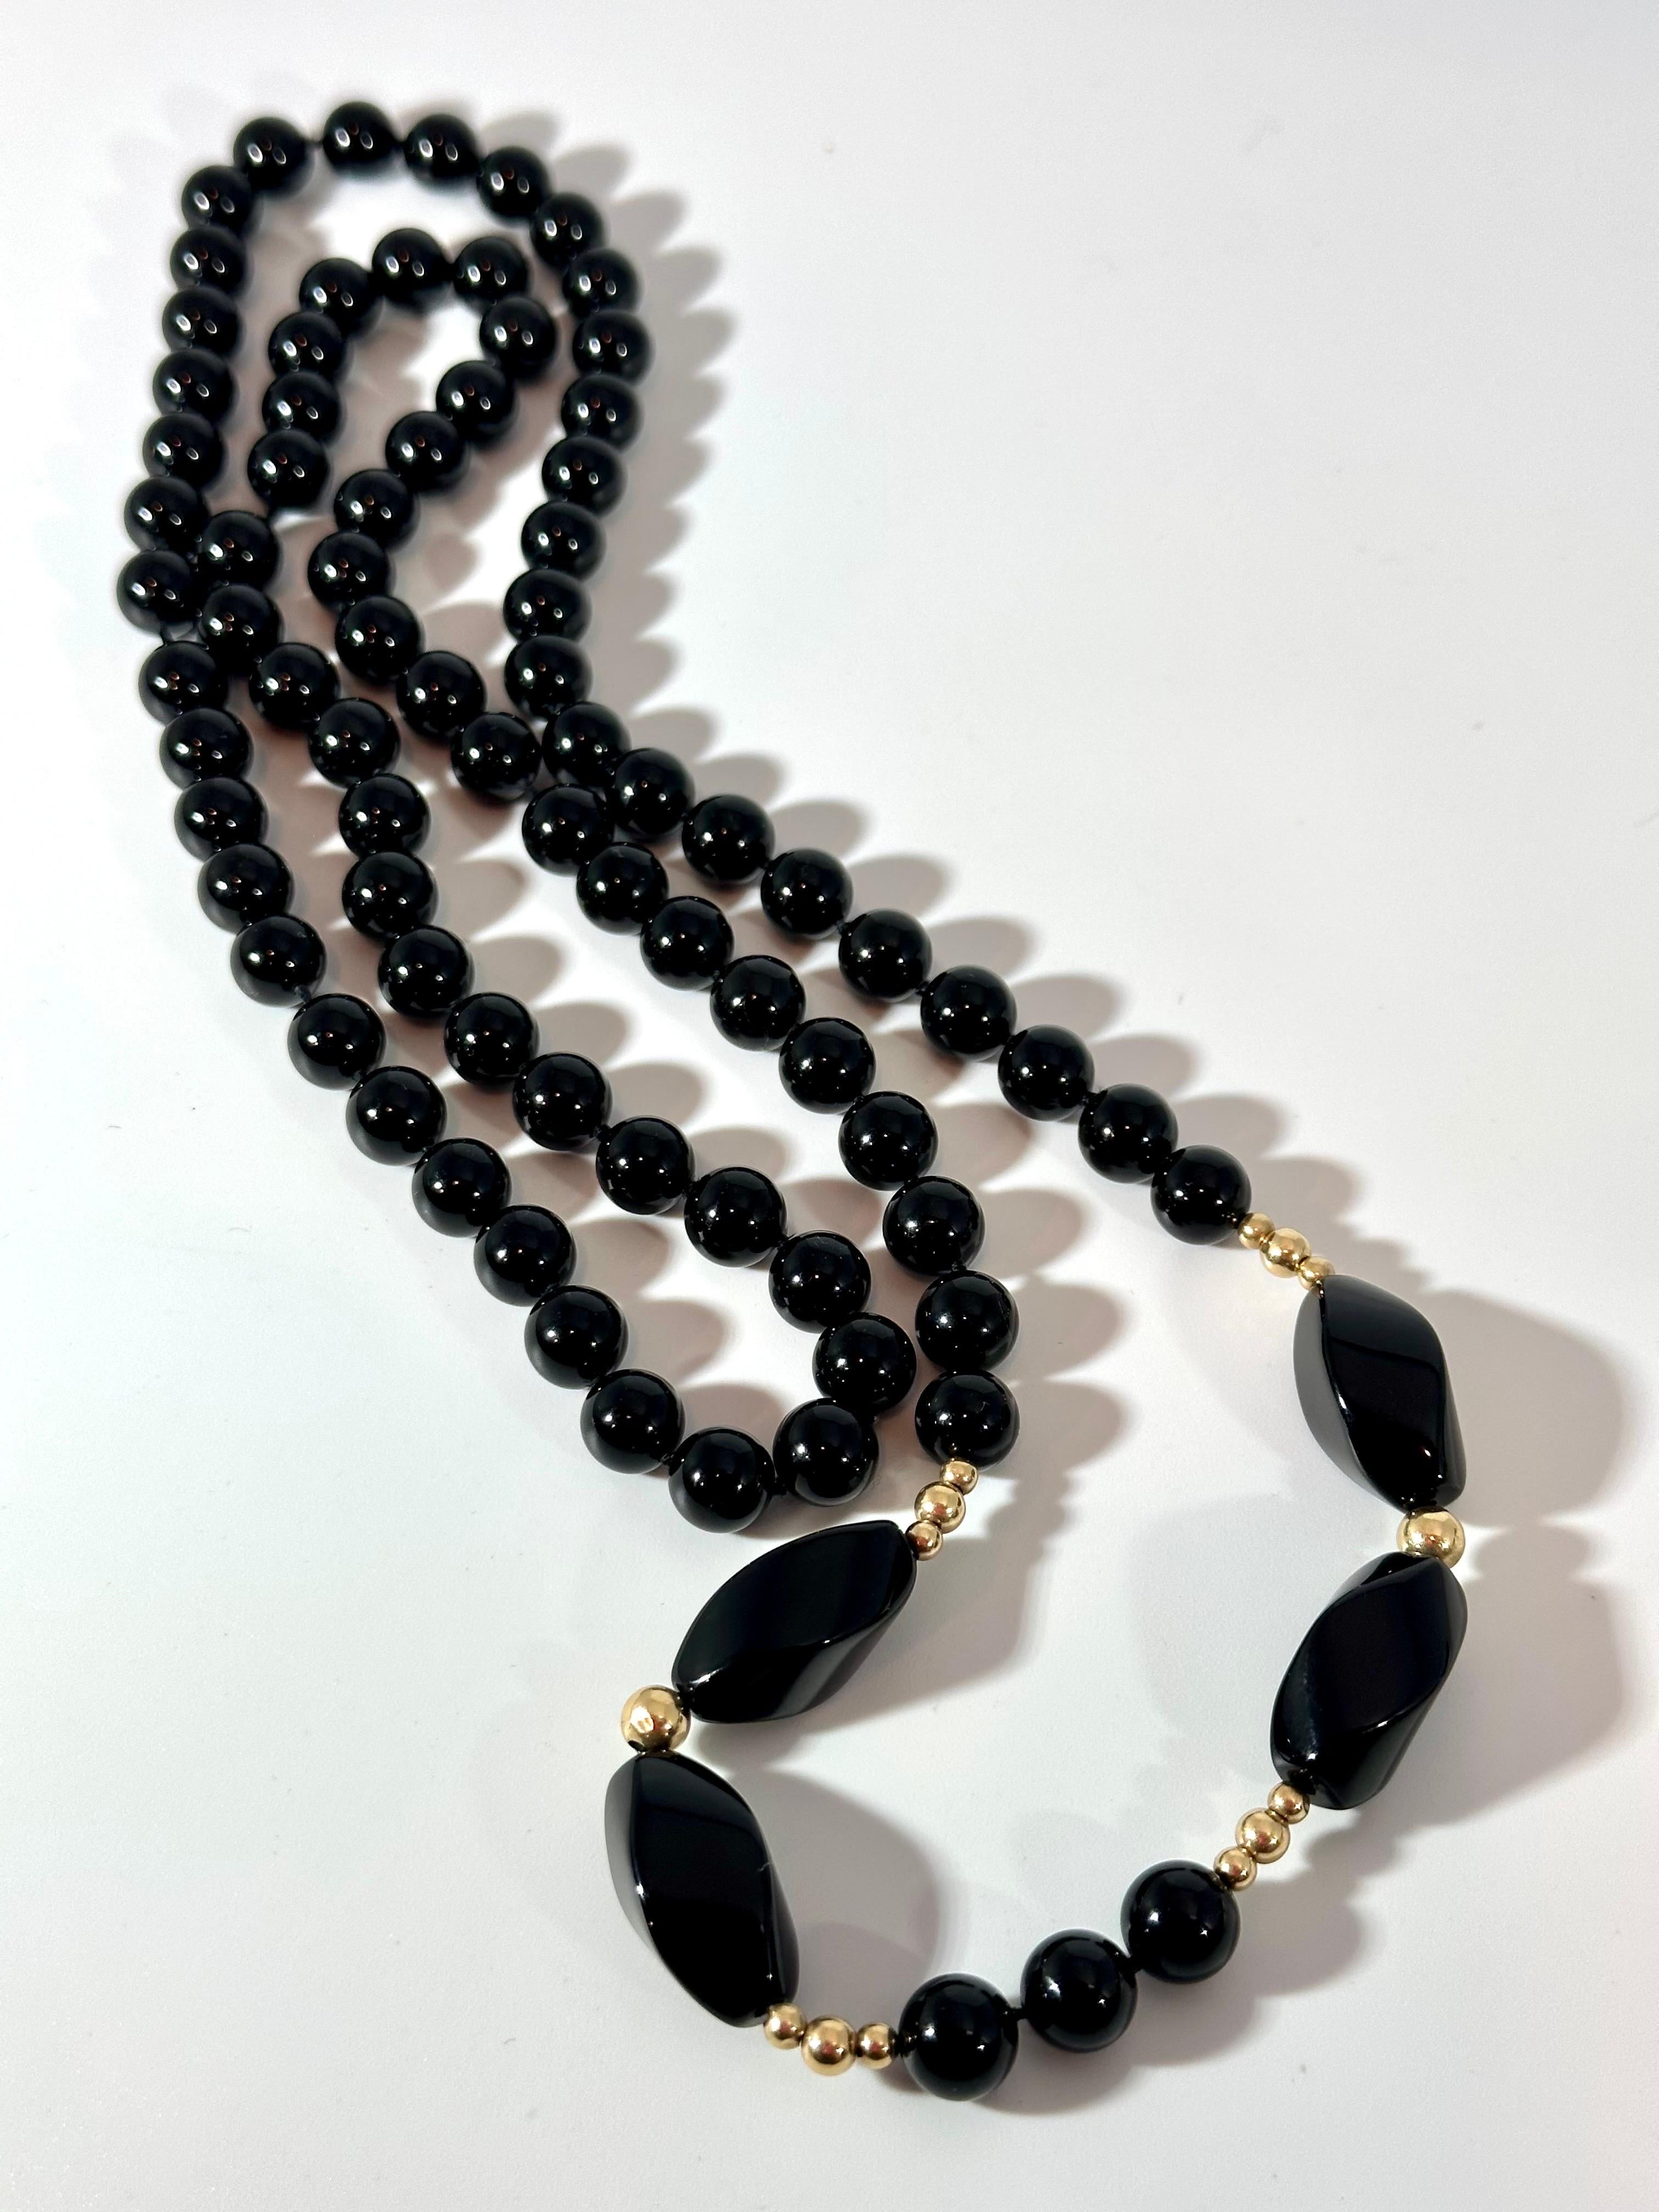 Round 8 MM Bead Black Onyx & 14 Karat Gold Bead Necklace 32 Inch Long In Excellent Condition For Sale In New York, NY